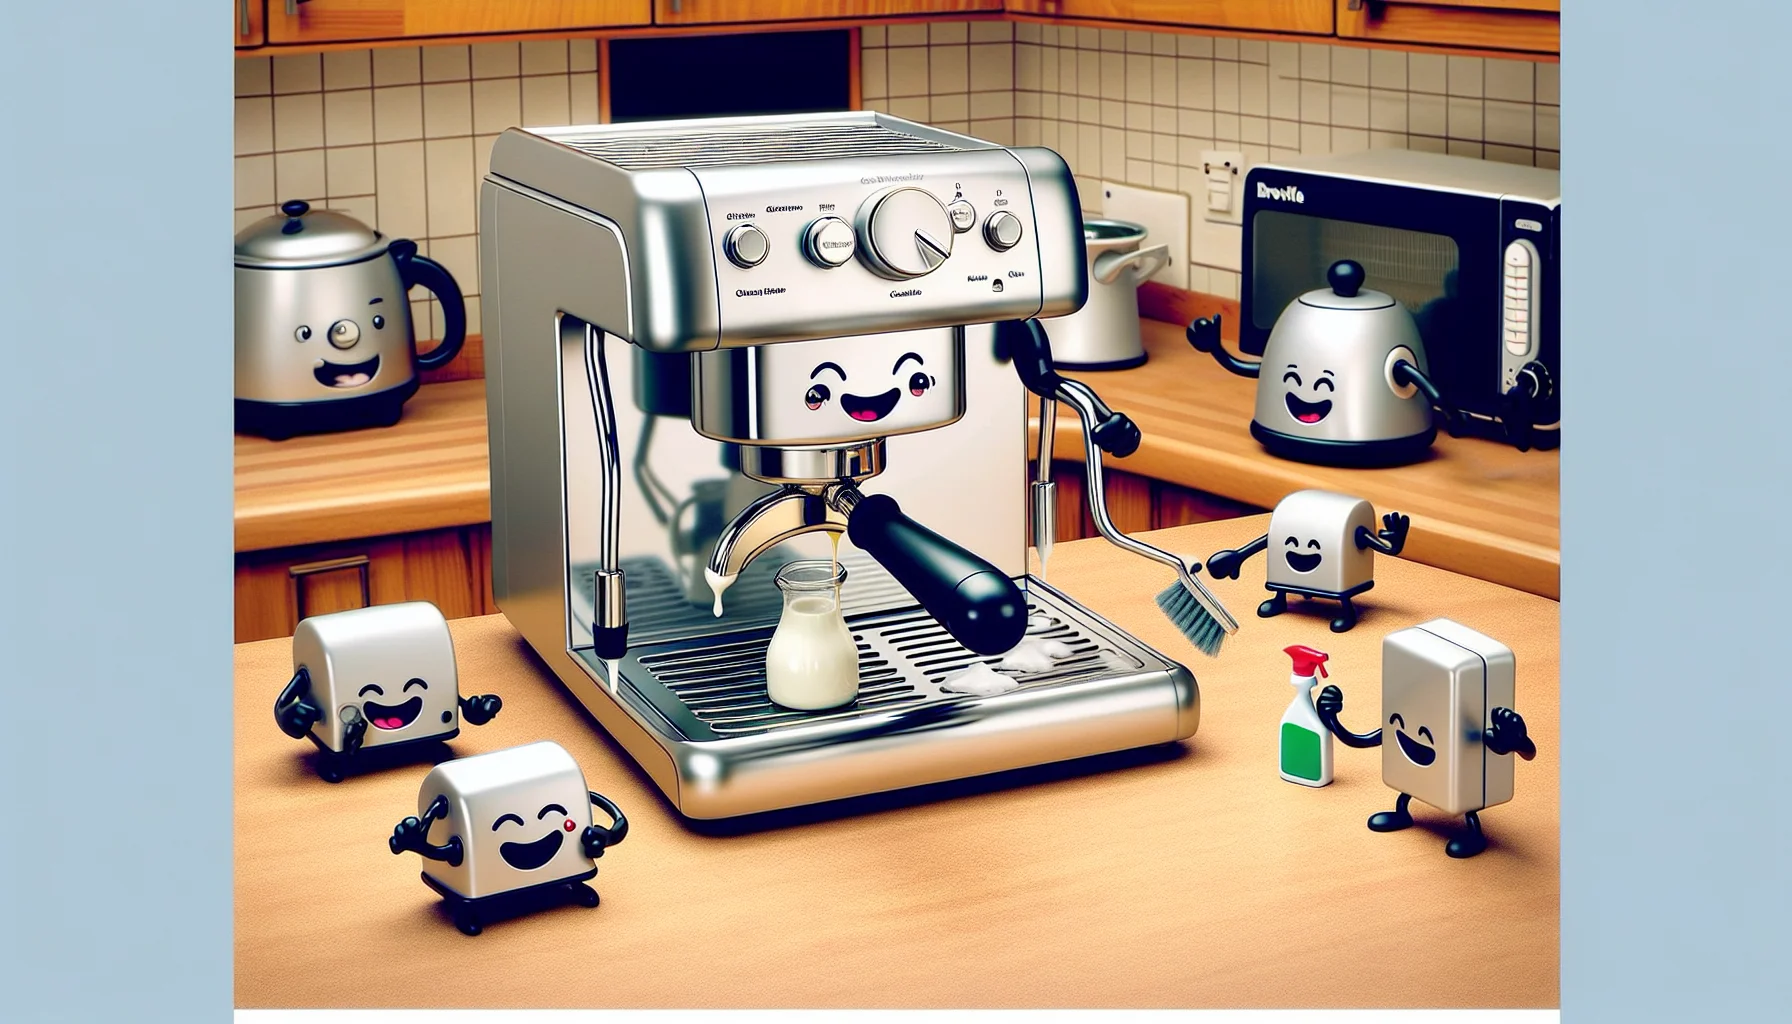 Picture a comedic scene in a home kitchen. In the center, there's a silver espresso machine with shiny buttons and a milk frother attached, resembling a modern Breville model. This machine has arms and legs similar to cartoon characters but still retains its appliance shape. It holds a tiny scrubbing brush and a bottle of cleaning solution, attempting to clean its own portafilter with a concentrated facial expression. Around the kitchen, other appliances such as a toaster and a blender are laughing and cheering it on. This scene infuses humor into the routine task of cleaning espresso machines, creating an enticing environment for coffee enthusiasts.